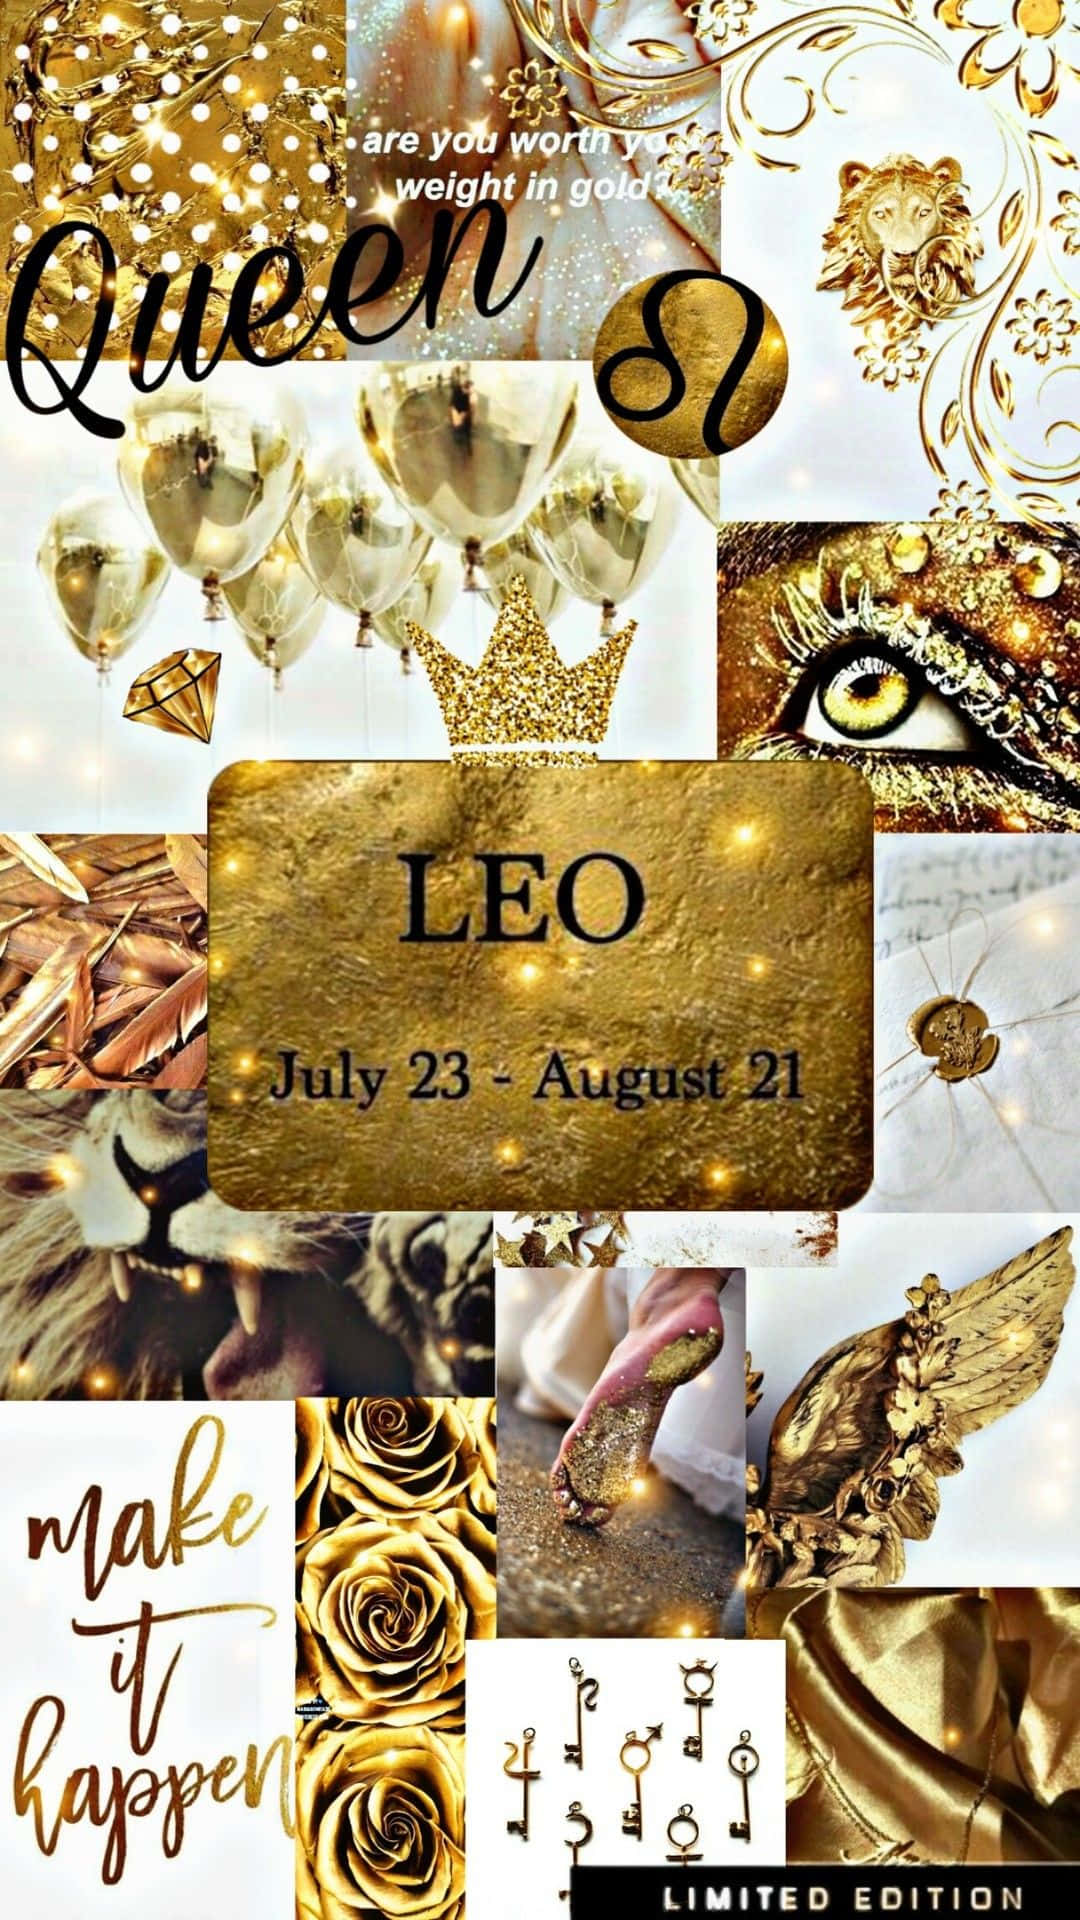 Symbolize strength and courage with the powerful Leo